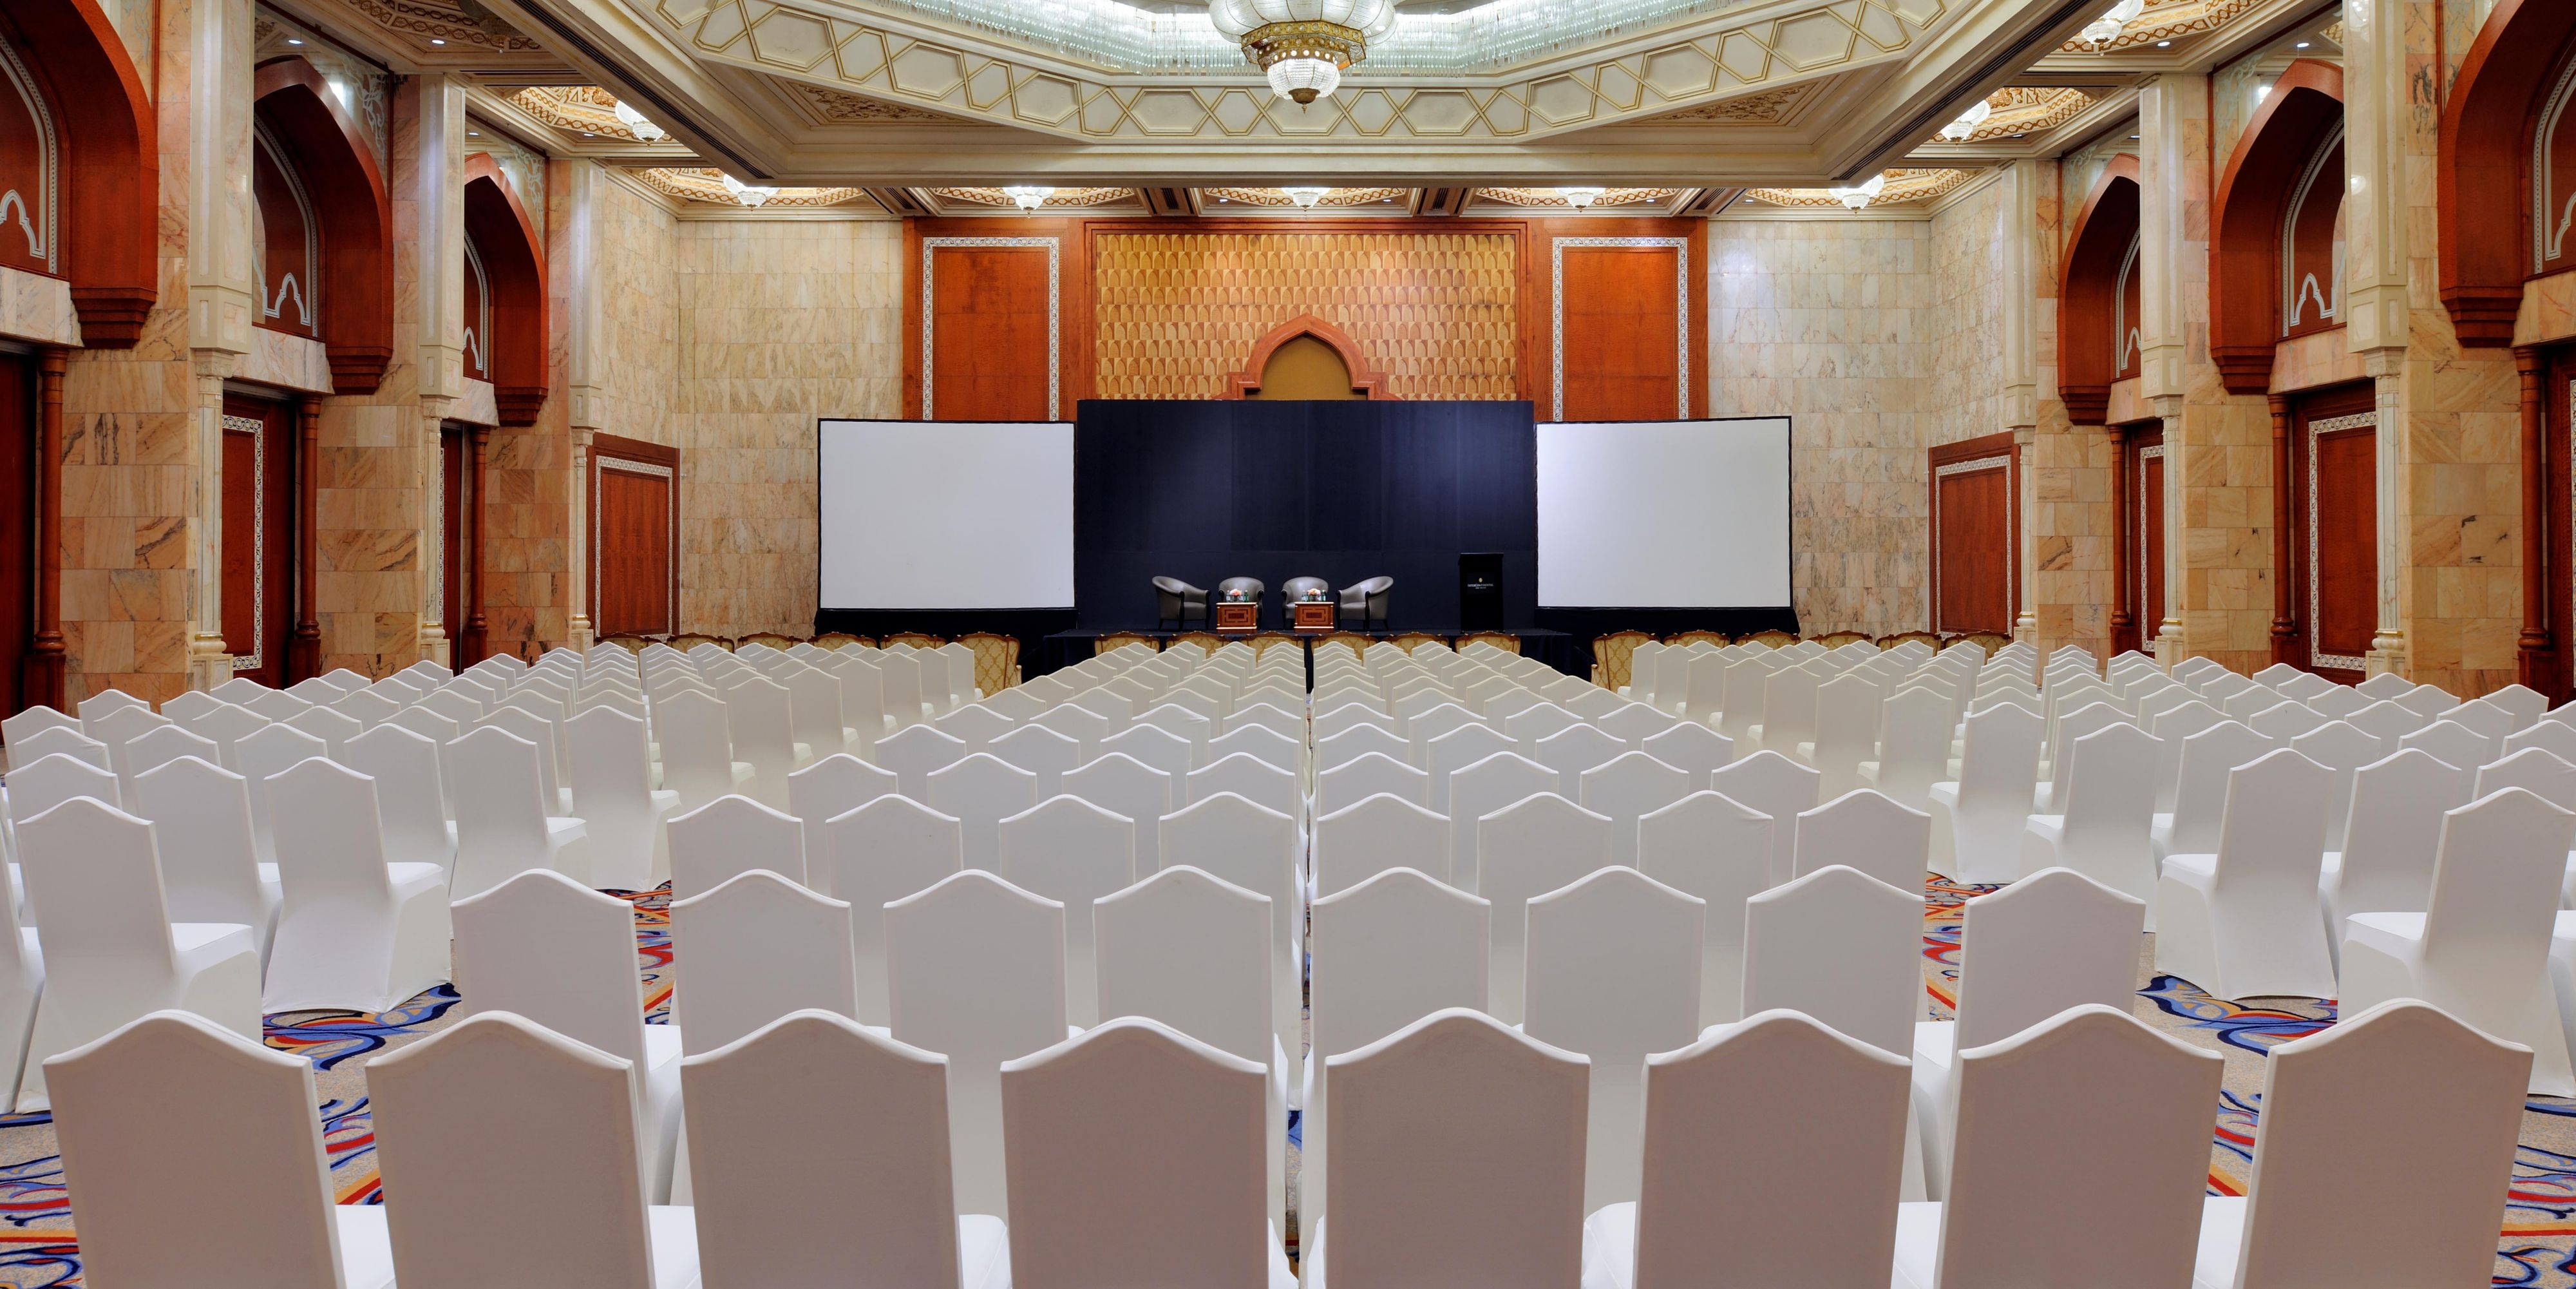 From intimate gatherings to extravagant affairs, functions at InterContinental Abu Dhabi set the standard in the UAE capital. With a range of stunning venues and an expert team of planners, we can tailor your event down to the very last detail.